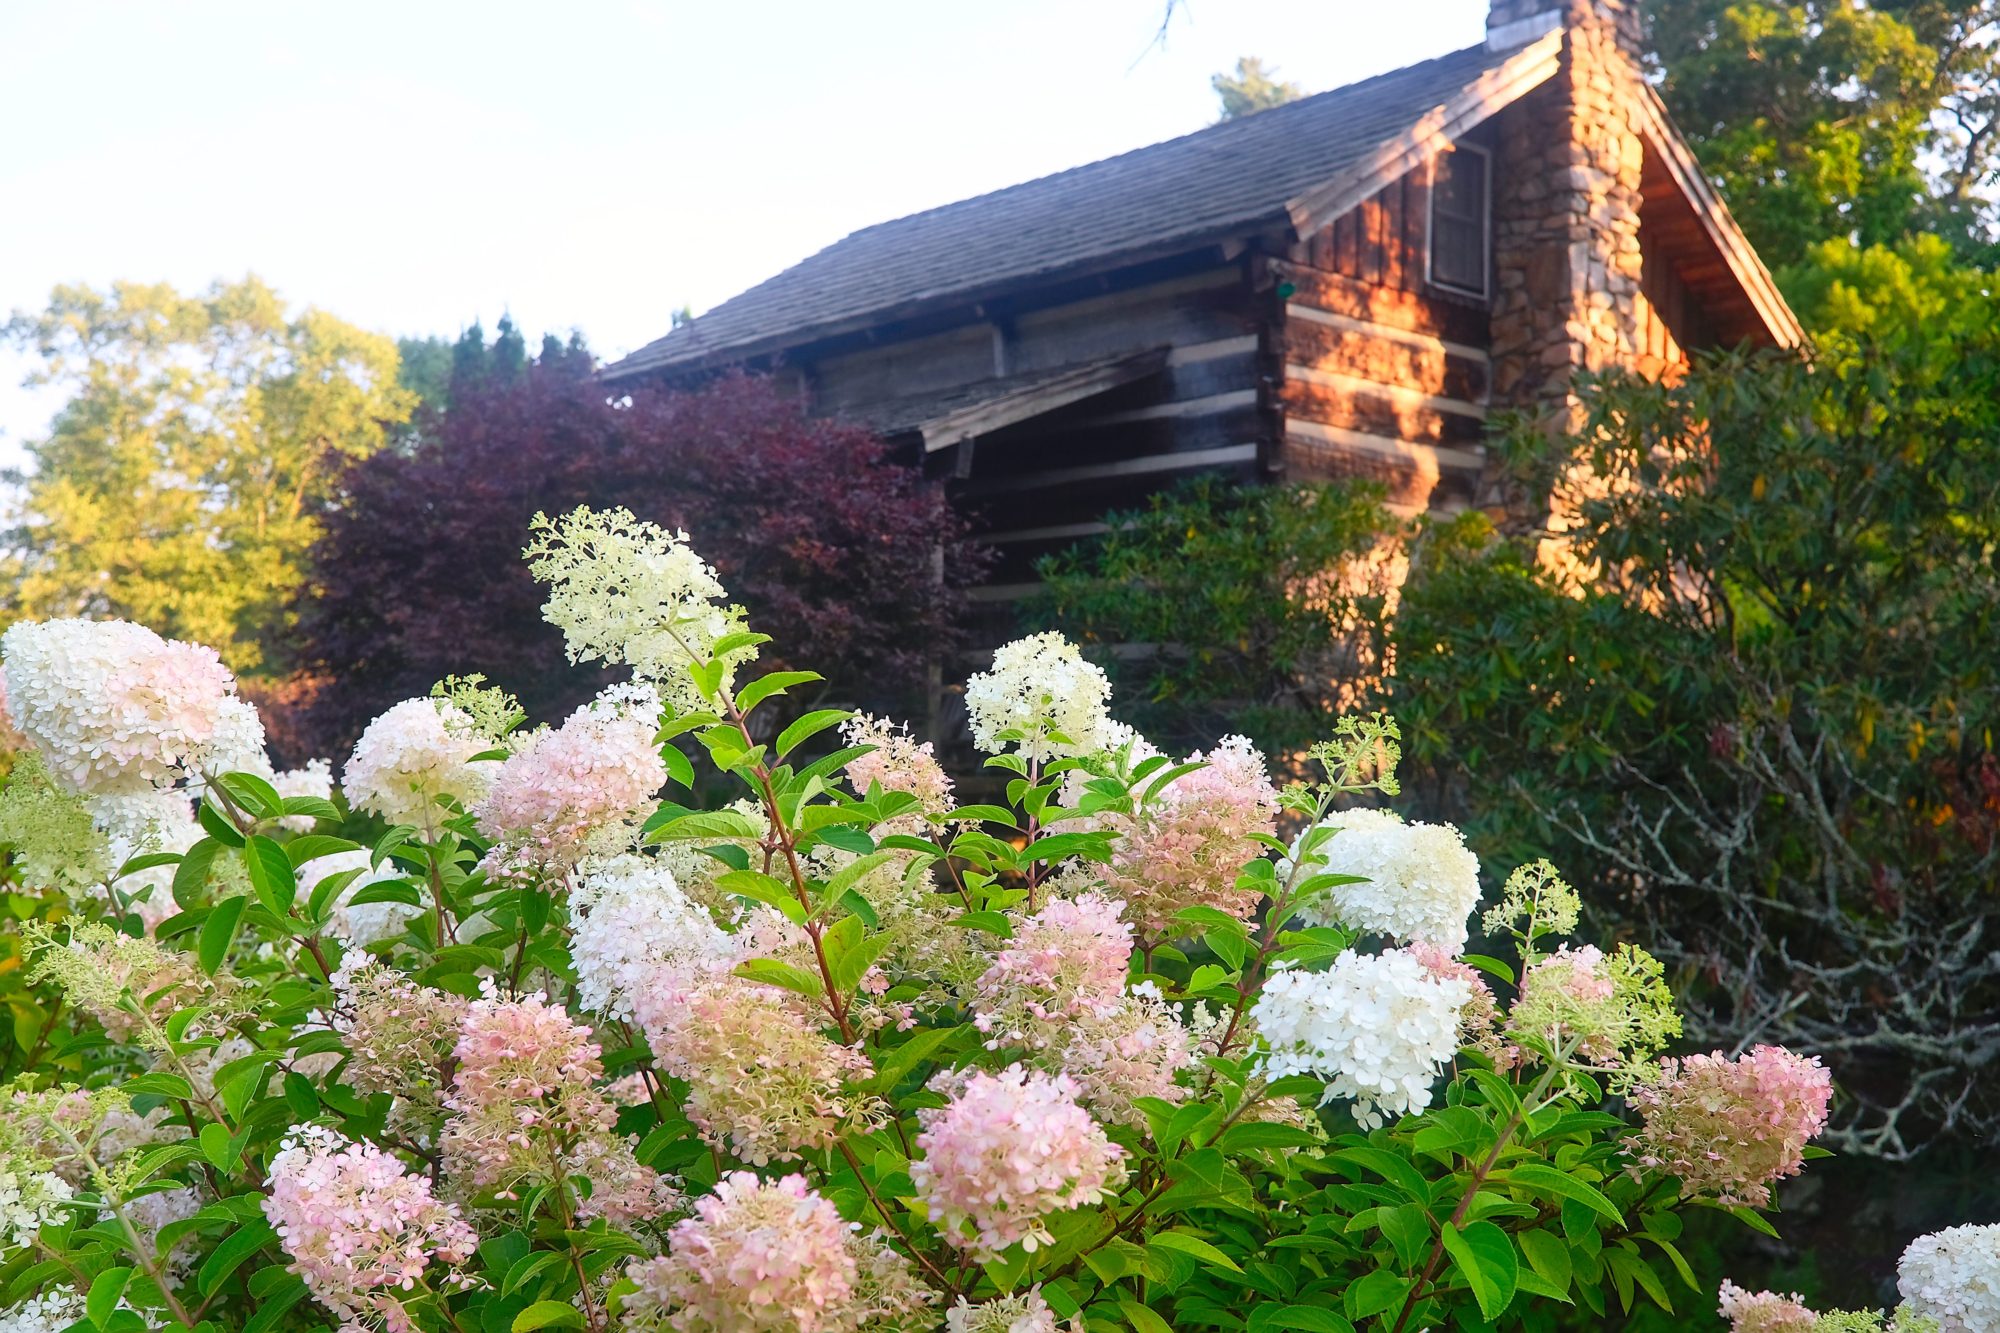 Exterior of the cabin with hydrangeas in the foreground